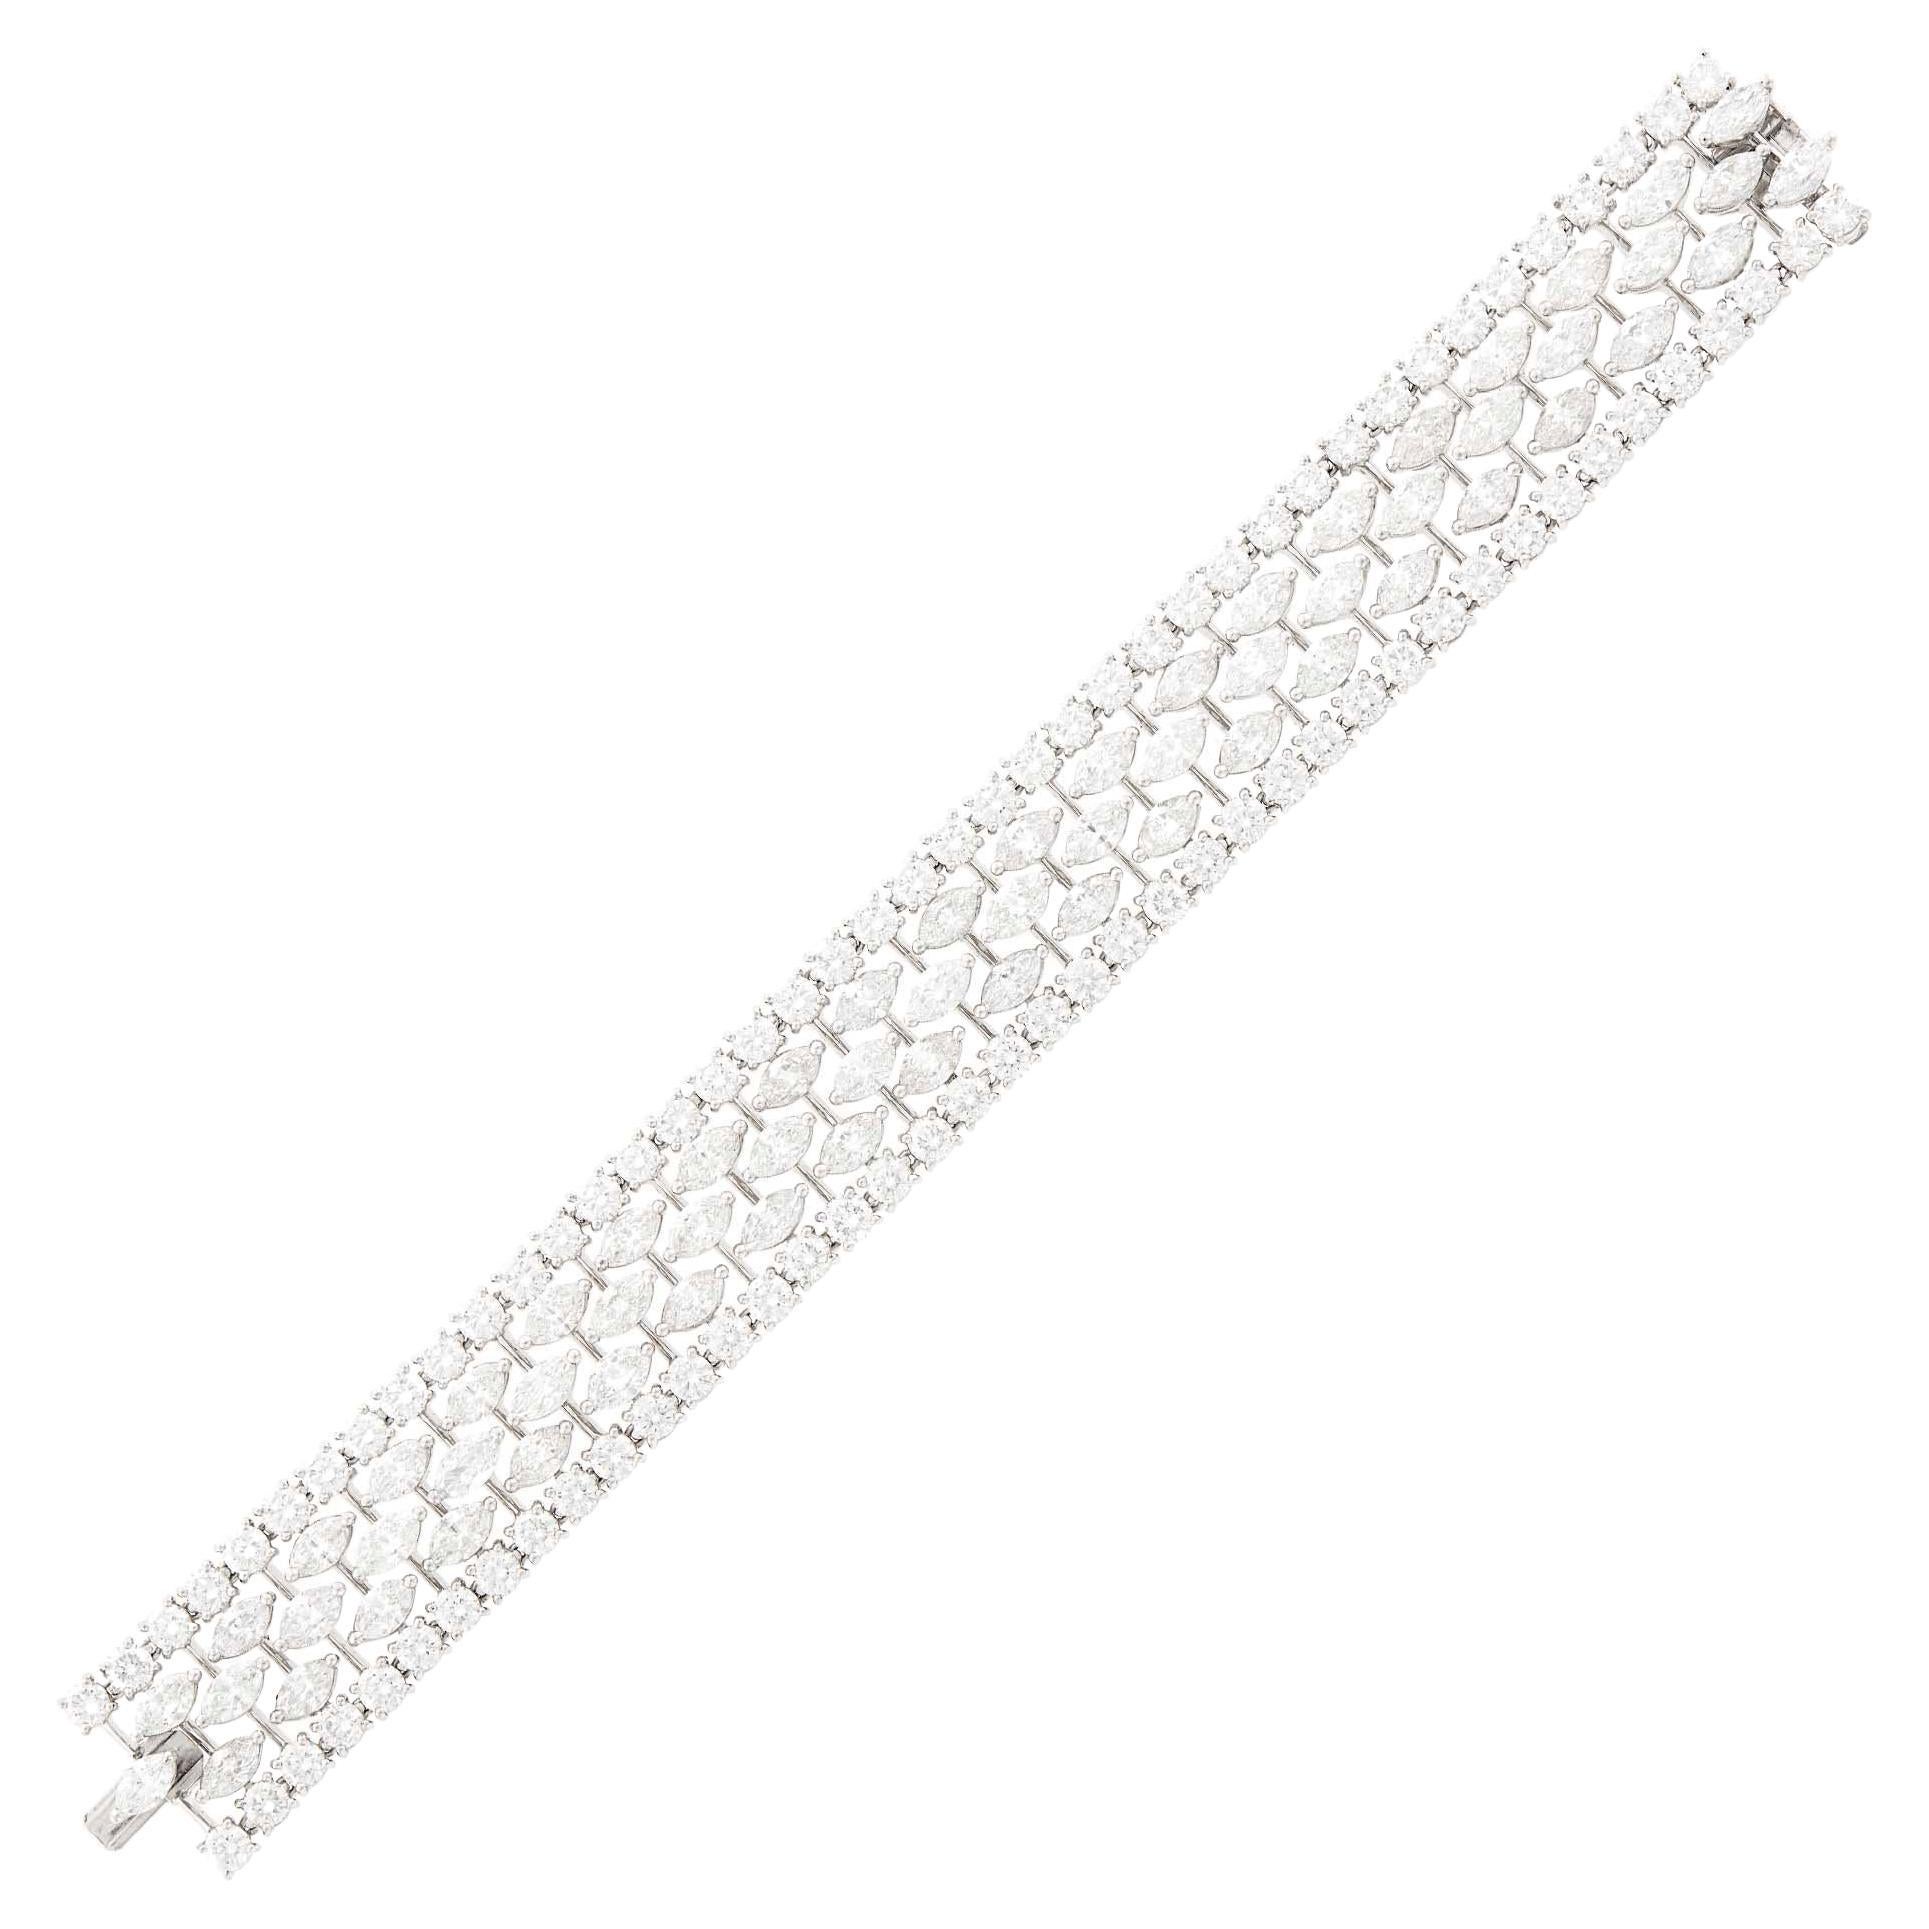 GRAFF  Platinum and Diamond Bracelet This bracelet has centering three rows of 63 marquise shaped diamonds on slender bands, edged by 84 round diamonds, totaling approx. 36.15 carats
Fine color and clarity diamonds , signed GRAFF, no. XXXX
 Length 7